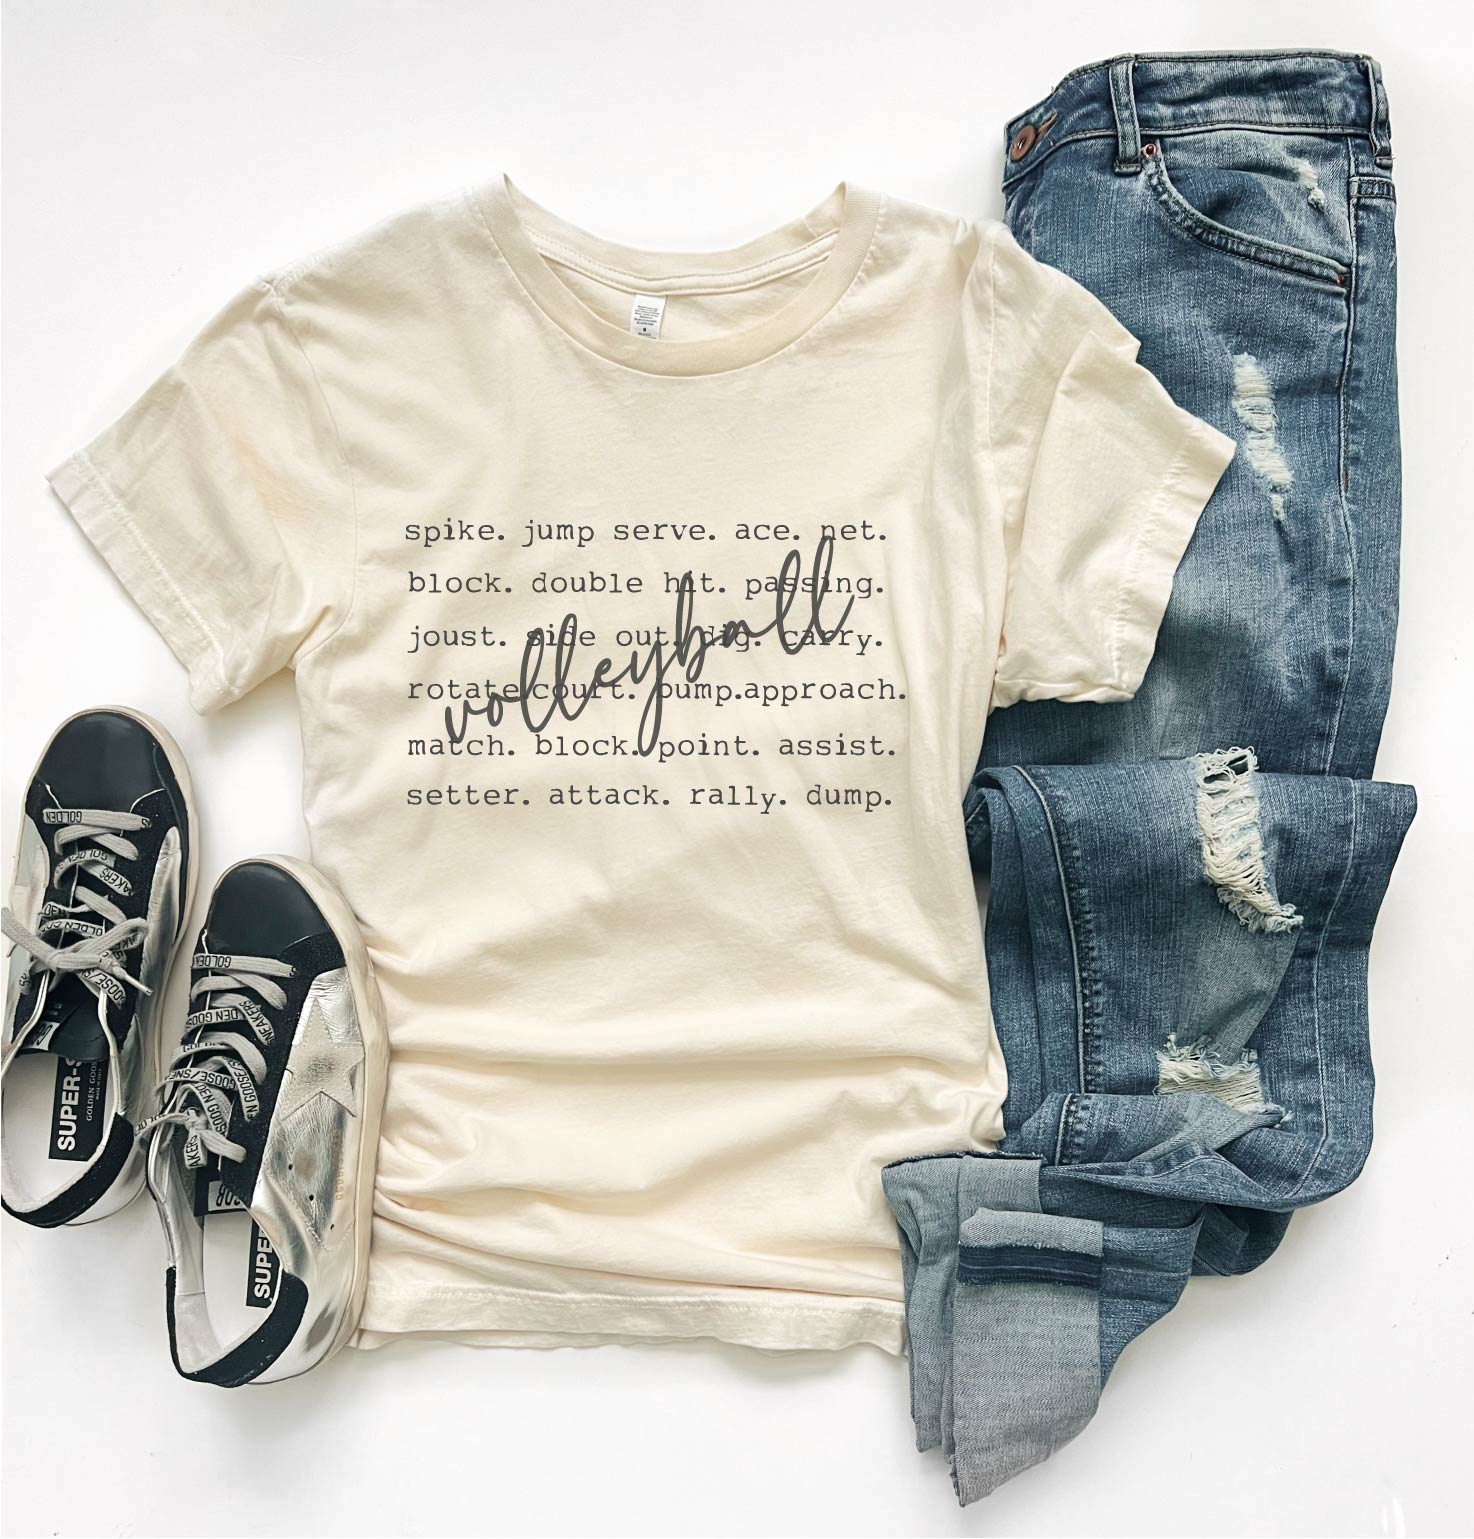 Volleyball words tee sports Bella canvas 3001 